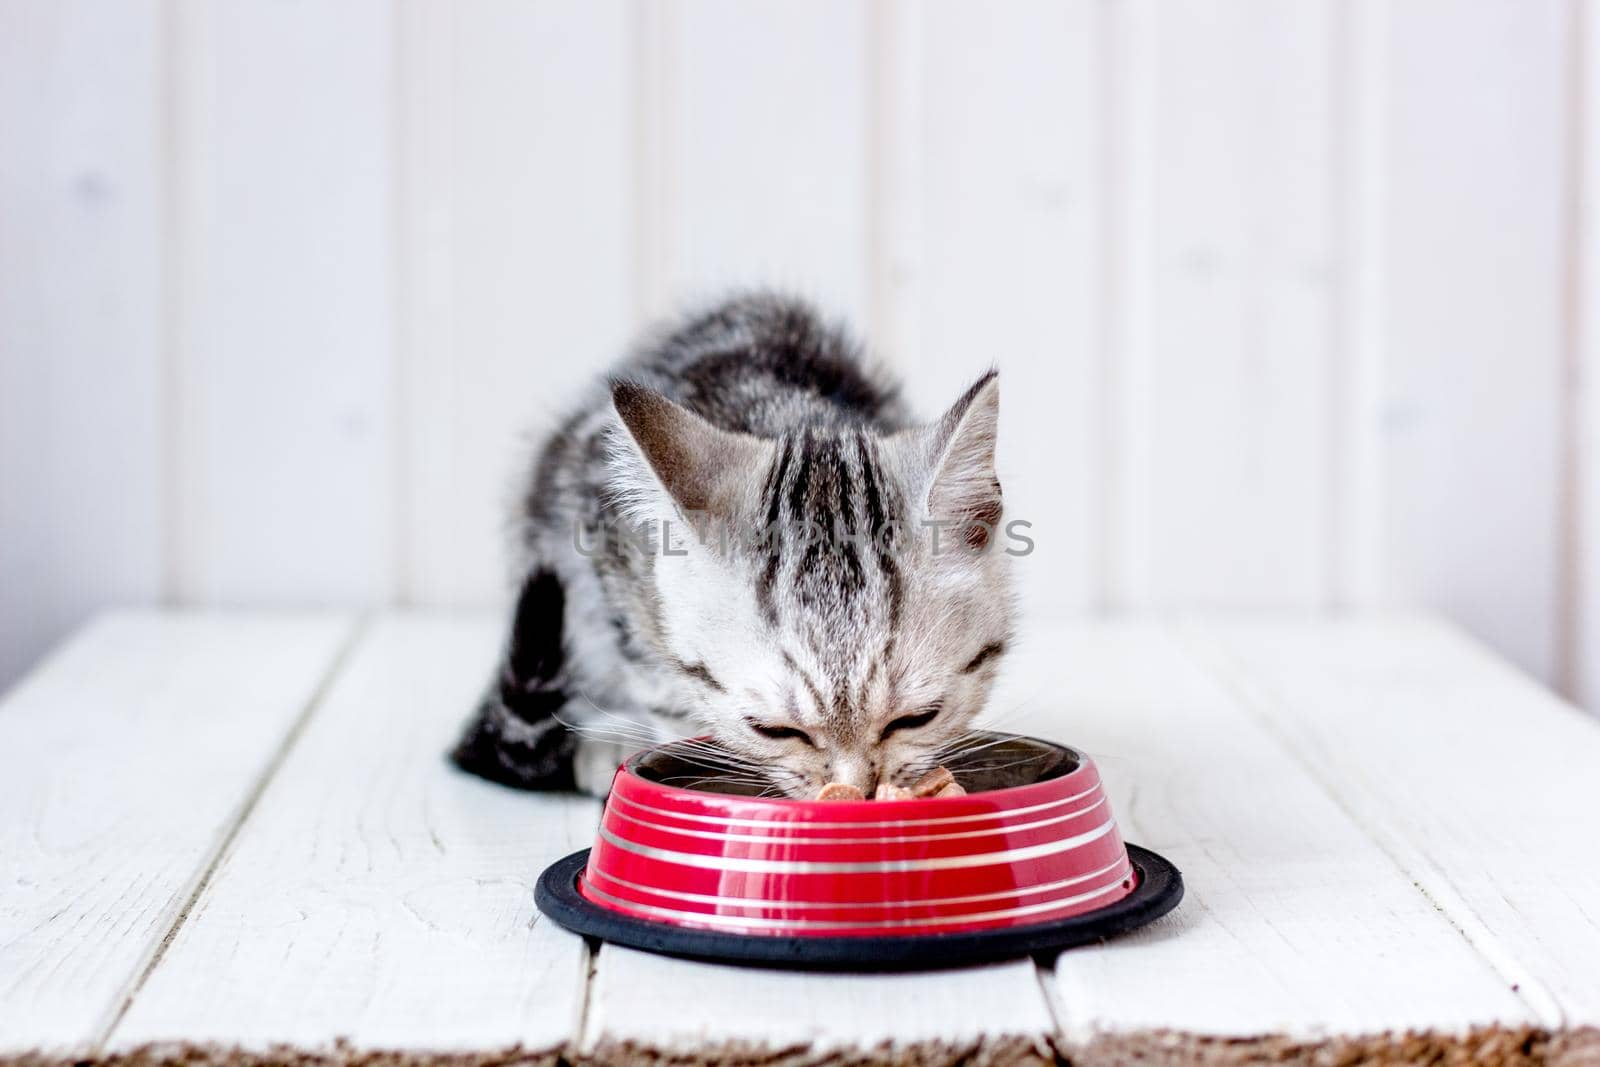 Adorable gray cat eating pet food from red metal bowl